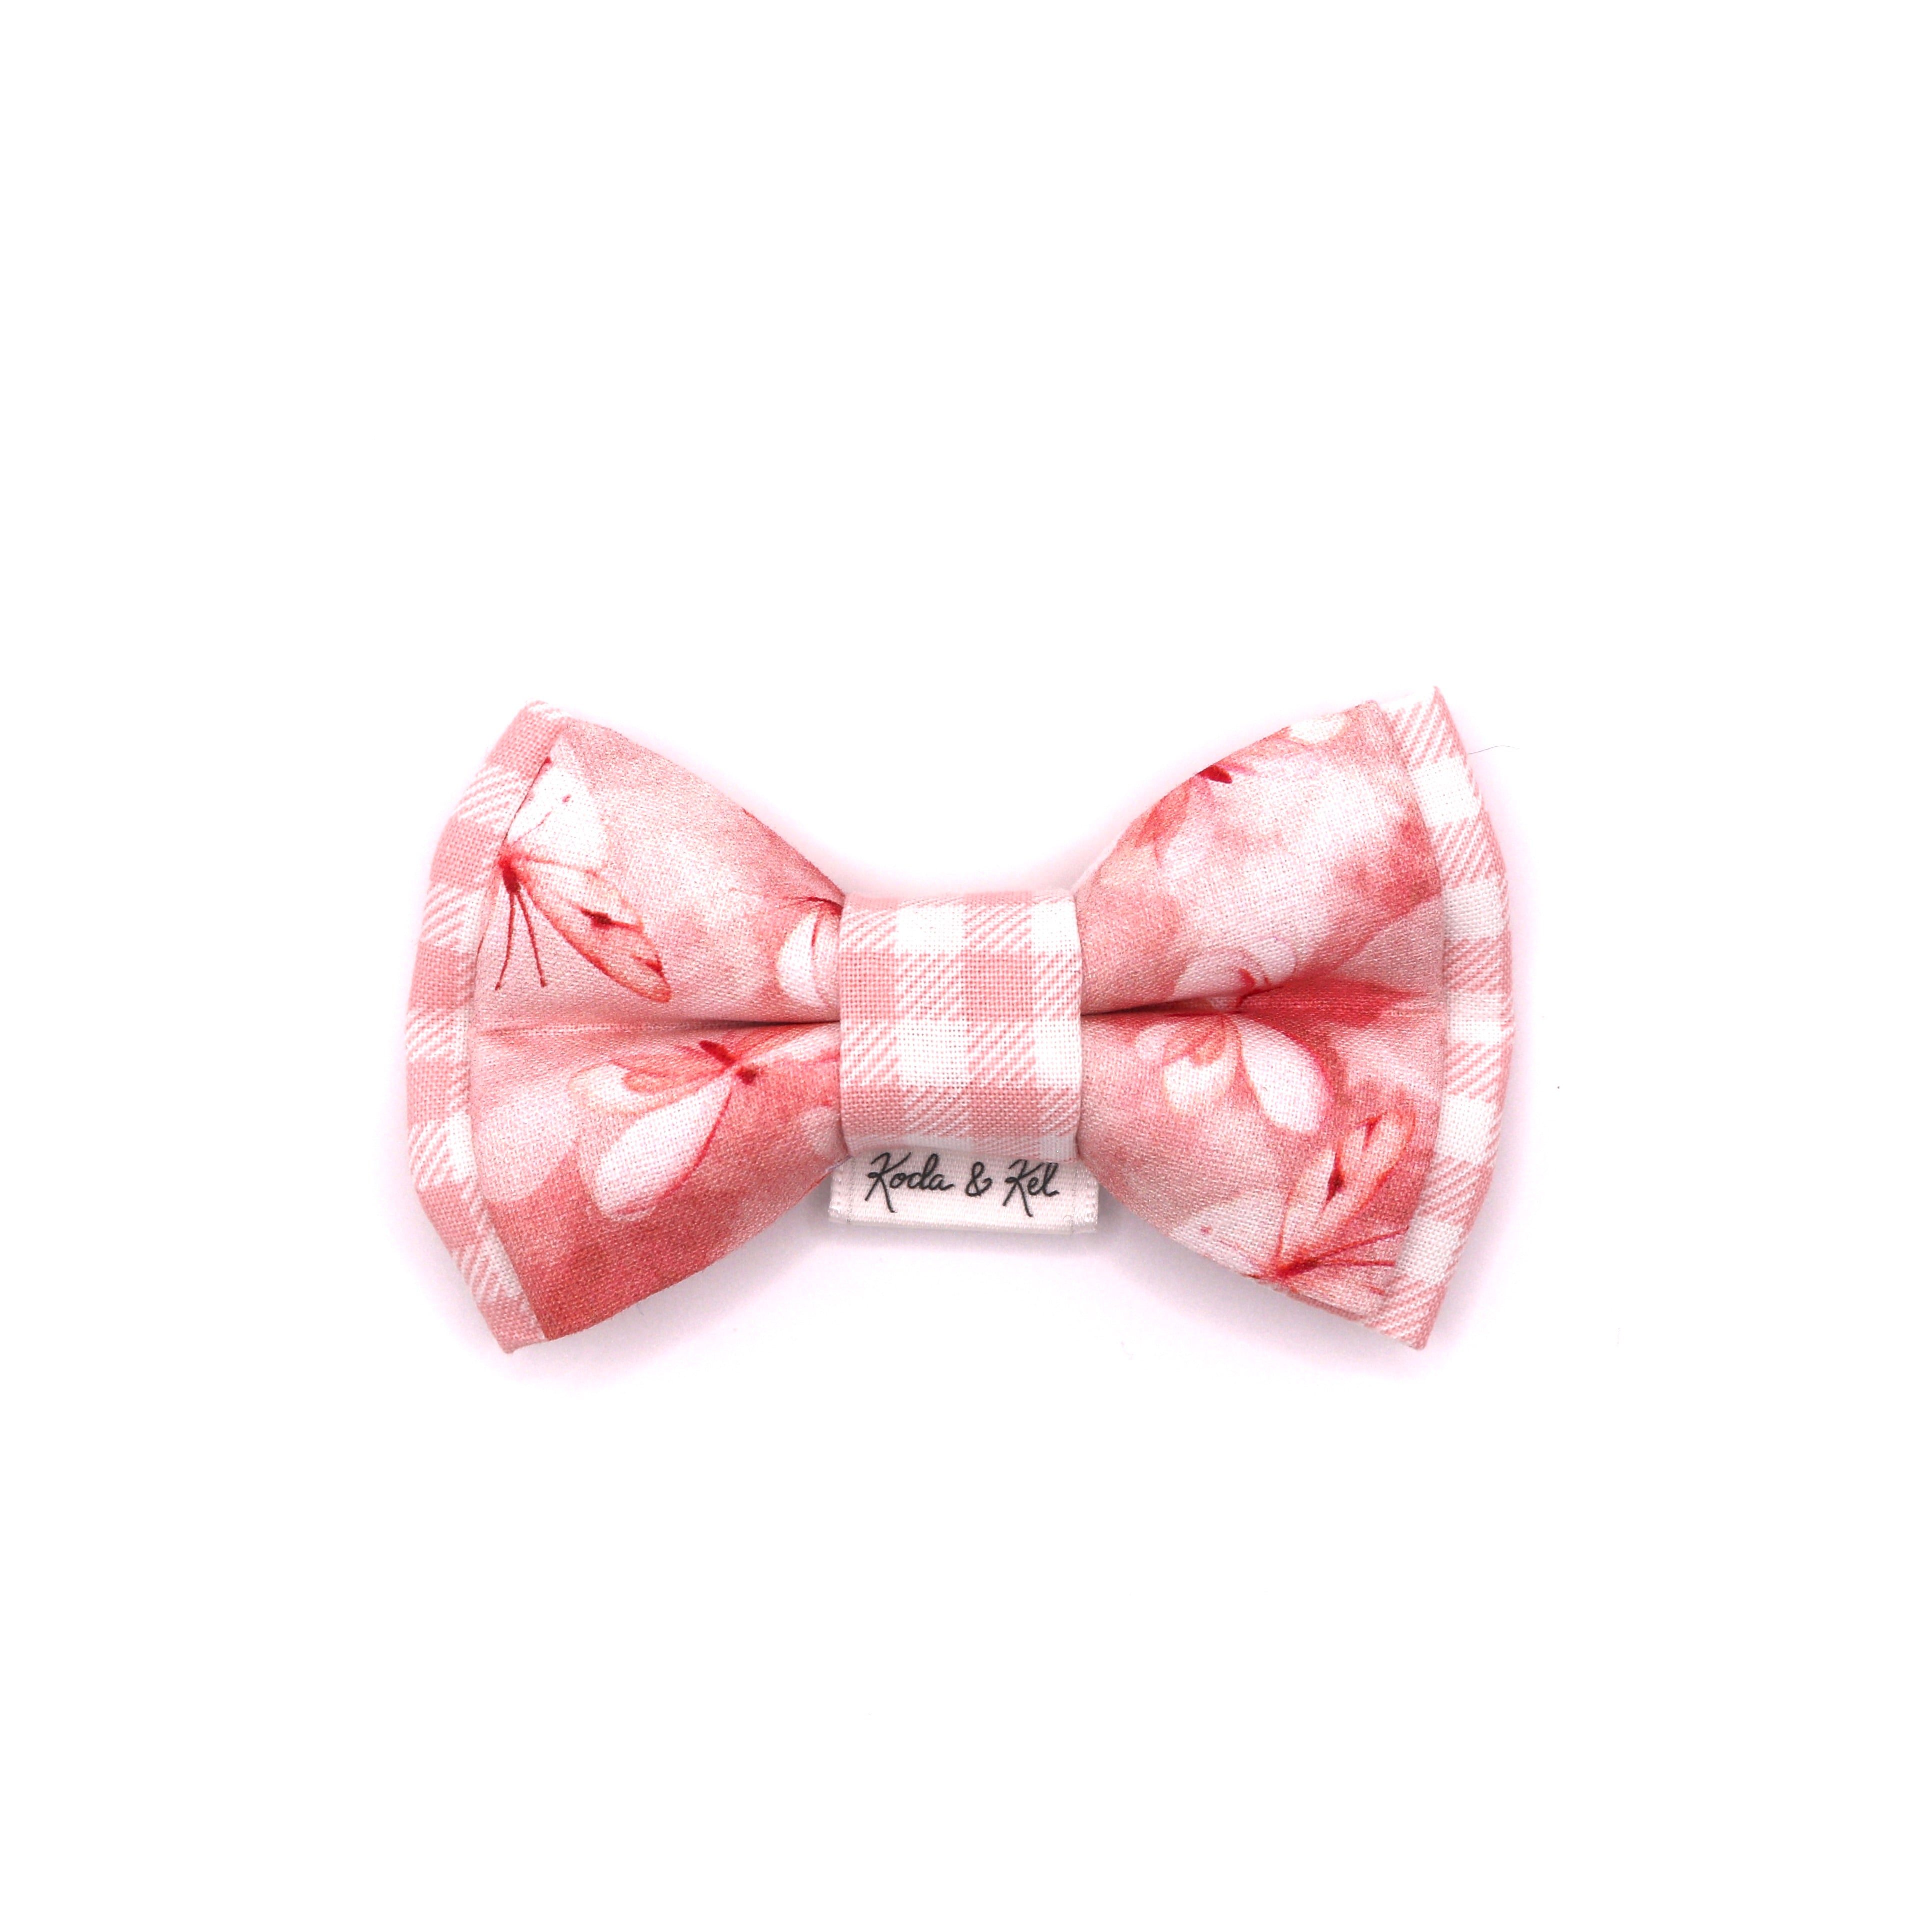 Sunset Butterfly Bow Tie